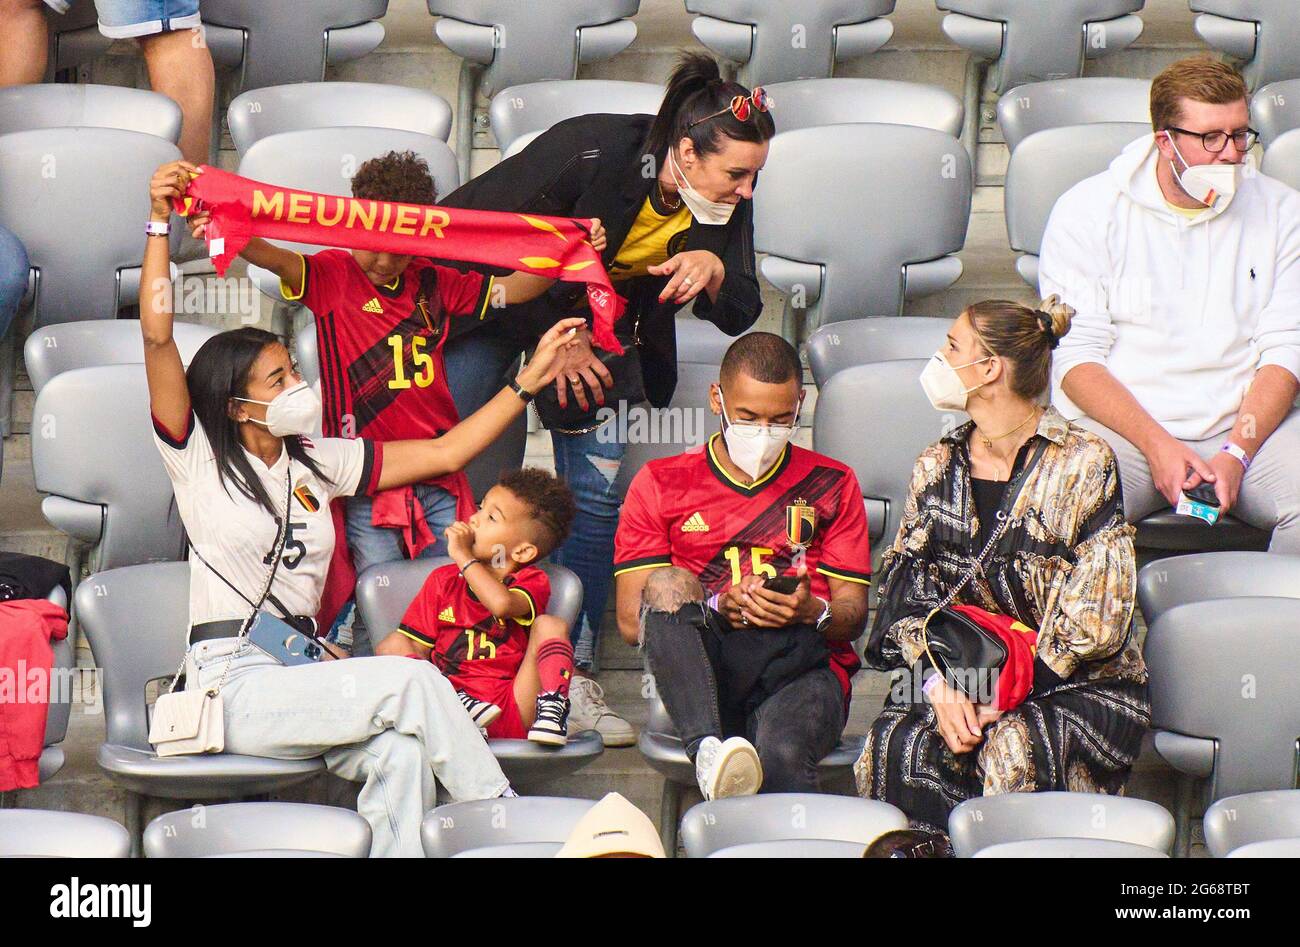 Thomas MEUNIER, Belgium Nr.15 Deborah Panzokou, girlfriend of Thomas MEUNIER, Belgium Nr.15 with son Landrys and brother in the quarterfinal match BELGIUM - ITALY 1-2 at the football UEFA European Championships 2020 in Season 2020/2021 on July 02, 2021  in Munich, Germany. © Peter Schatz / Alamy Live News Stock Photo